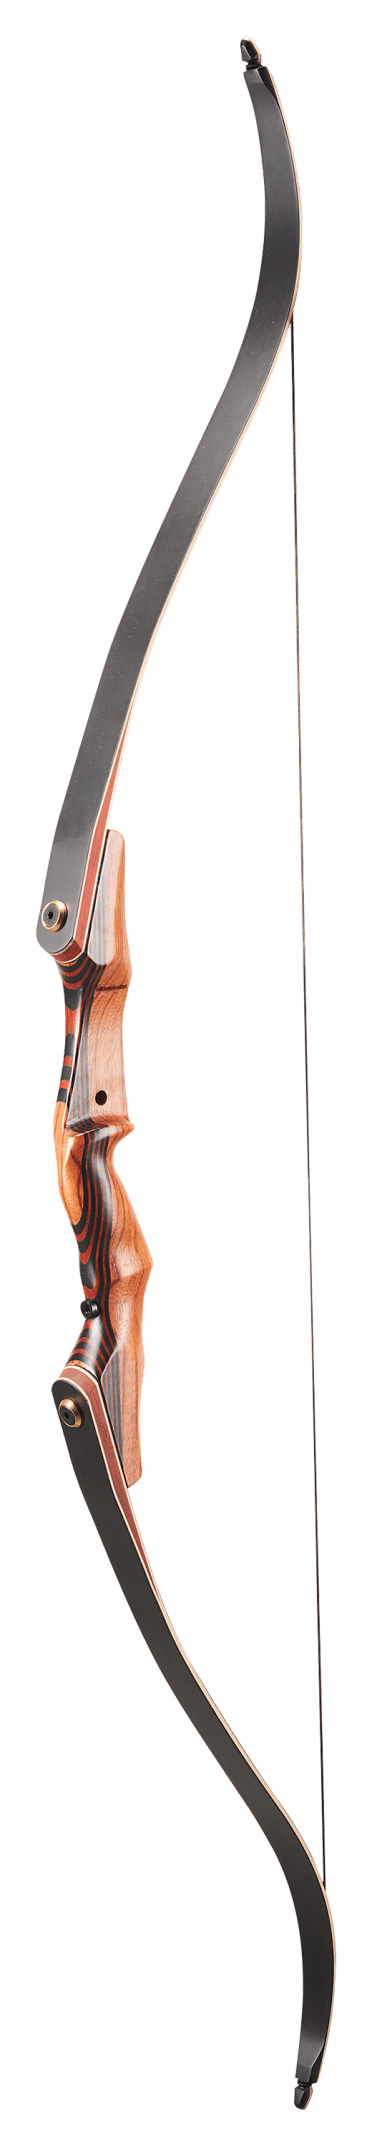 Traditional Bows, Longbows & Recurve Bows